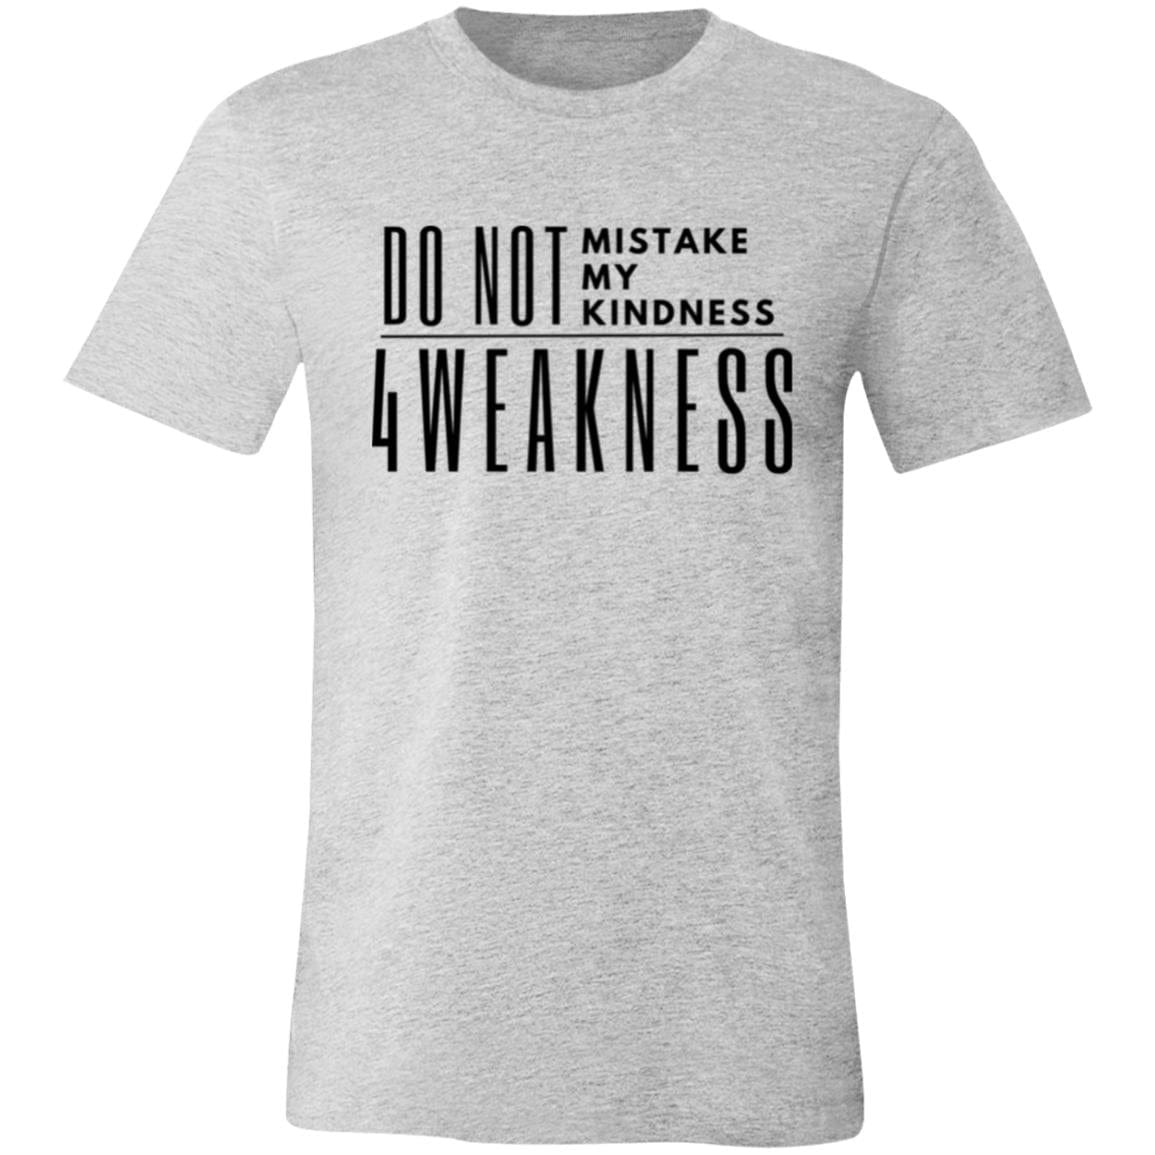 Do Not Mistake My Kindness 4Weakness Men's Every day Tshirt